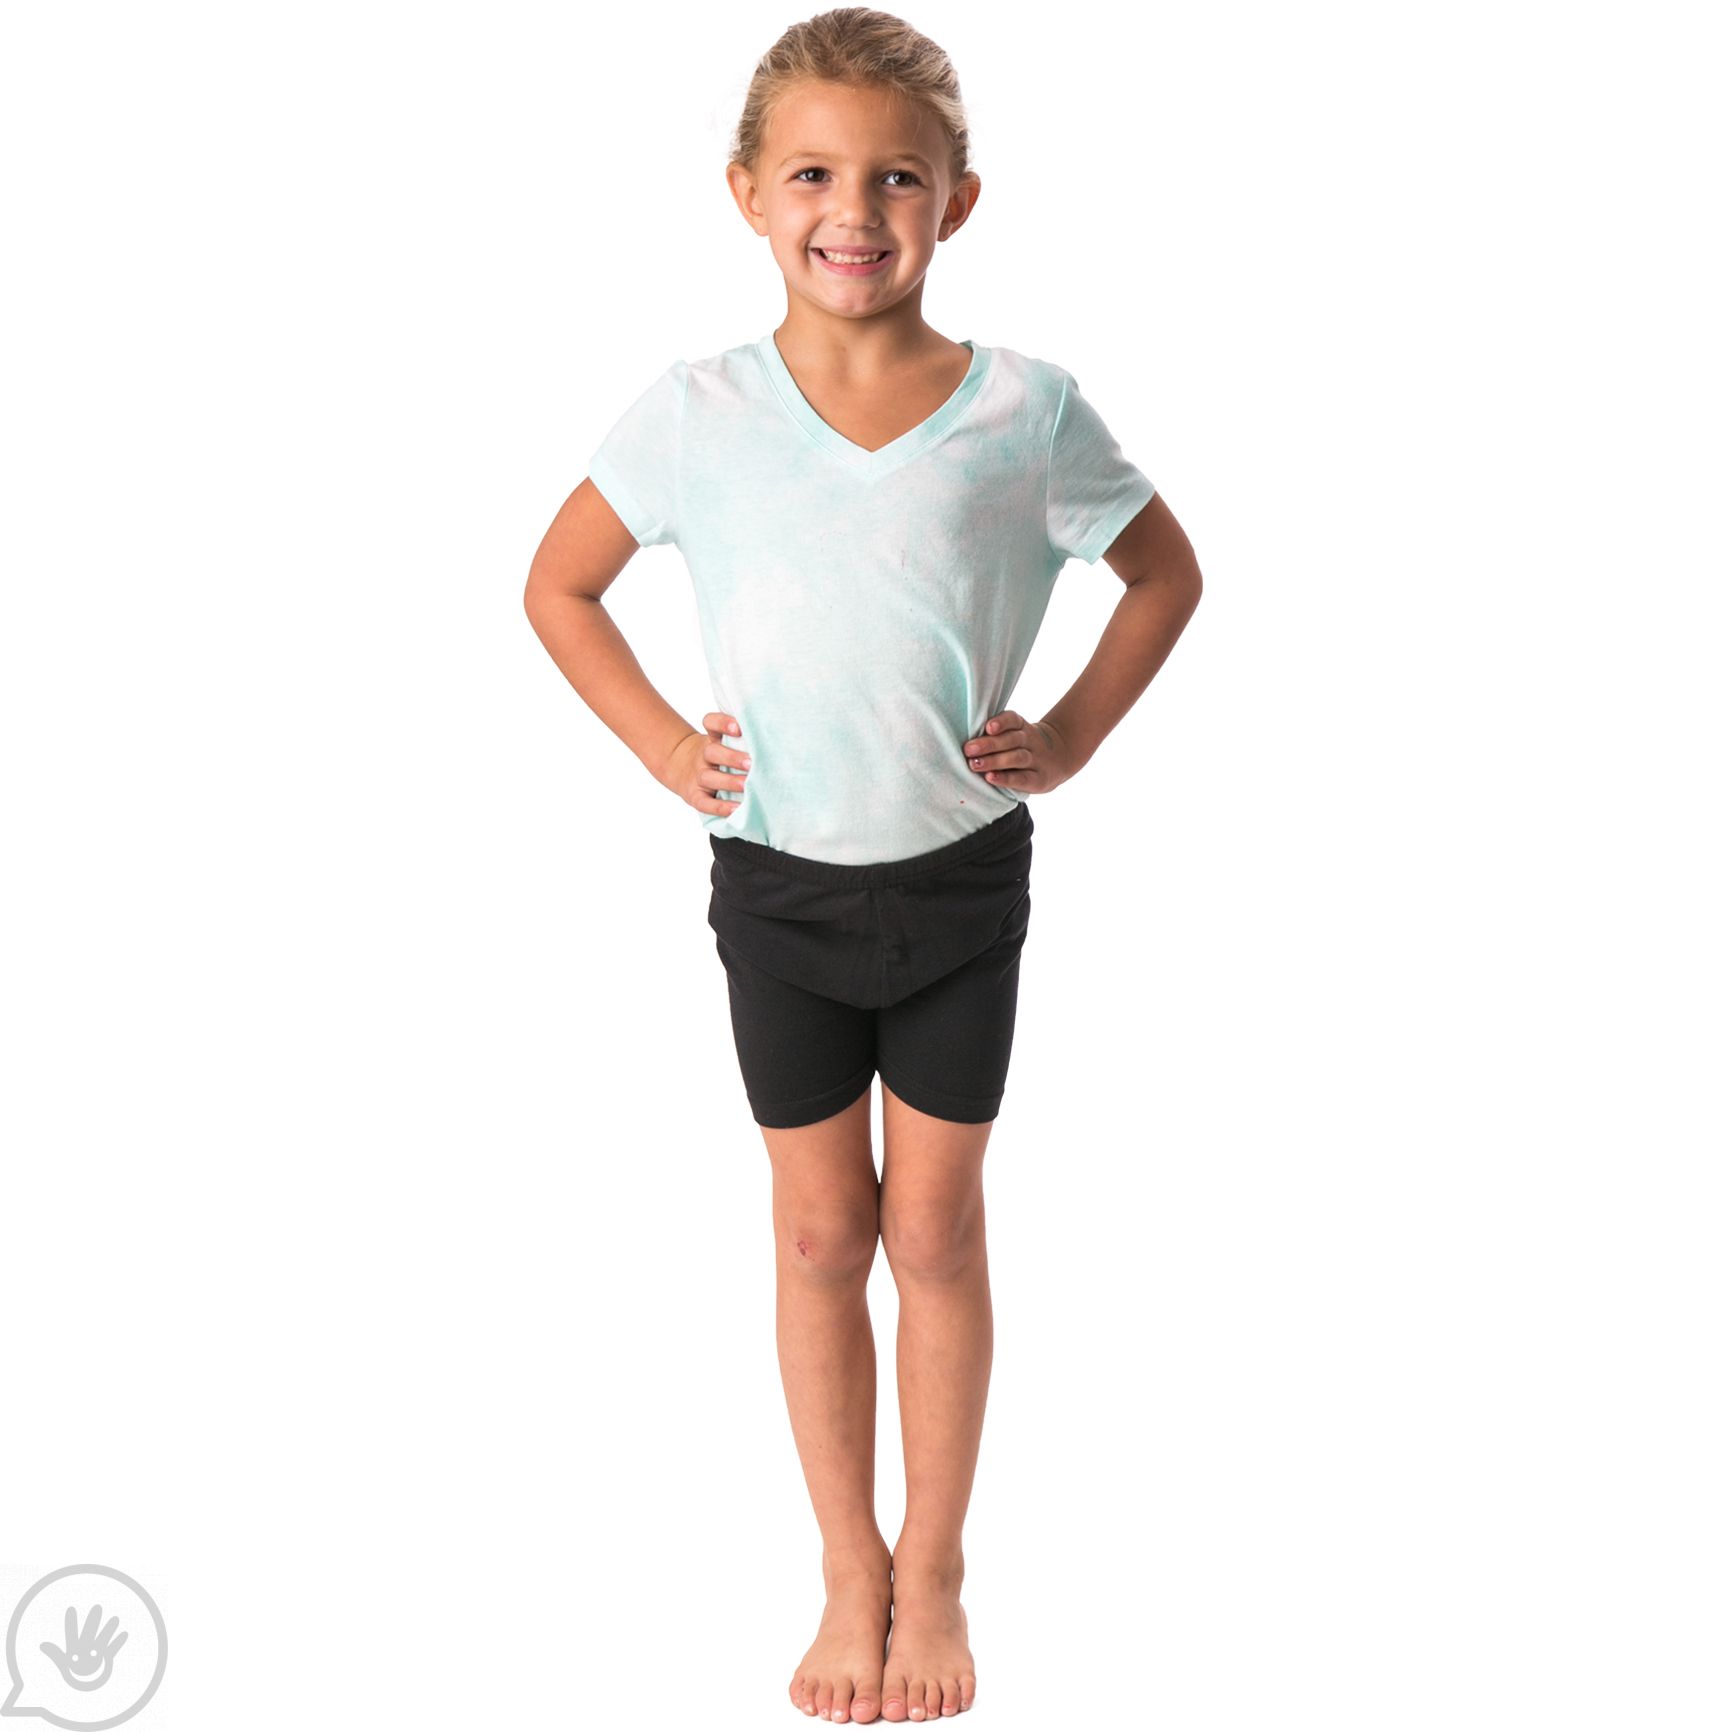 Tough SKINNY JEANS FOR CHILDREN | BLACK JEANS WITH HOLES - Minis Only | Kids  clothing and Baby clothing